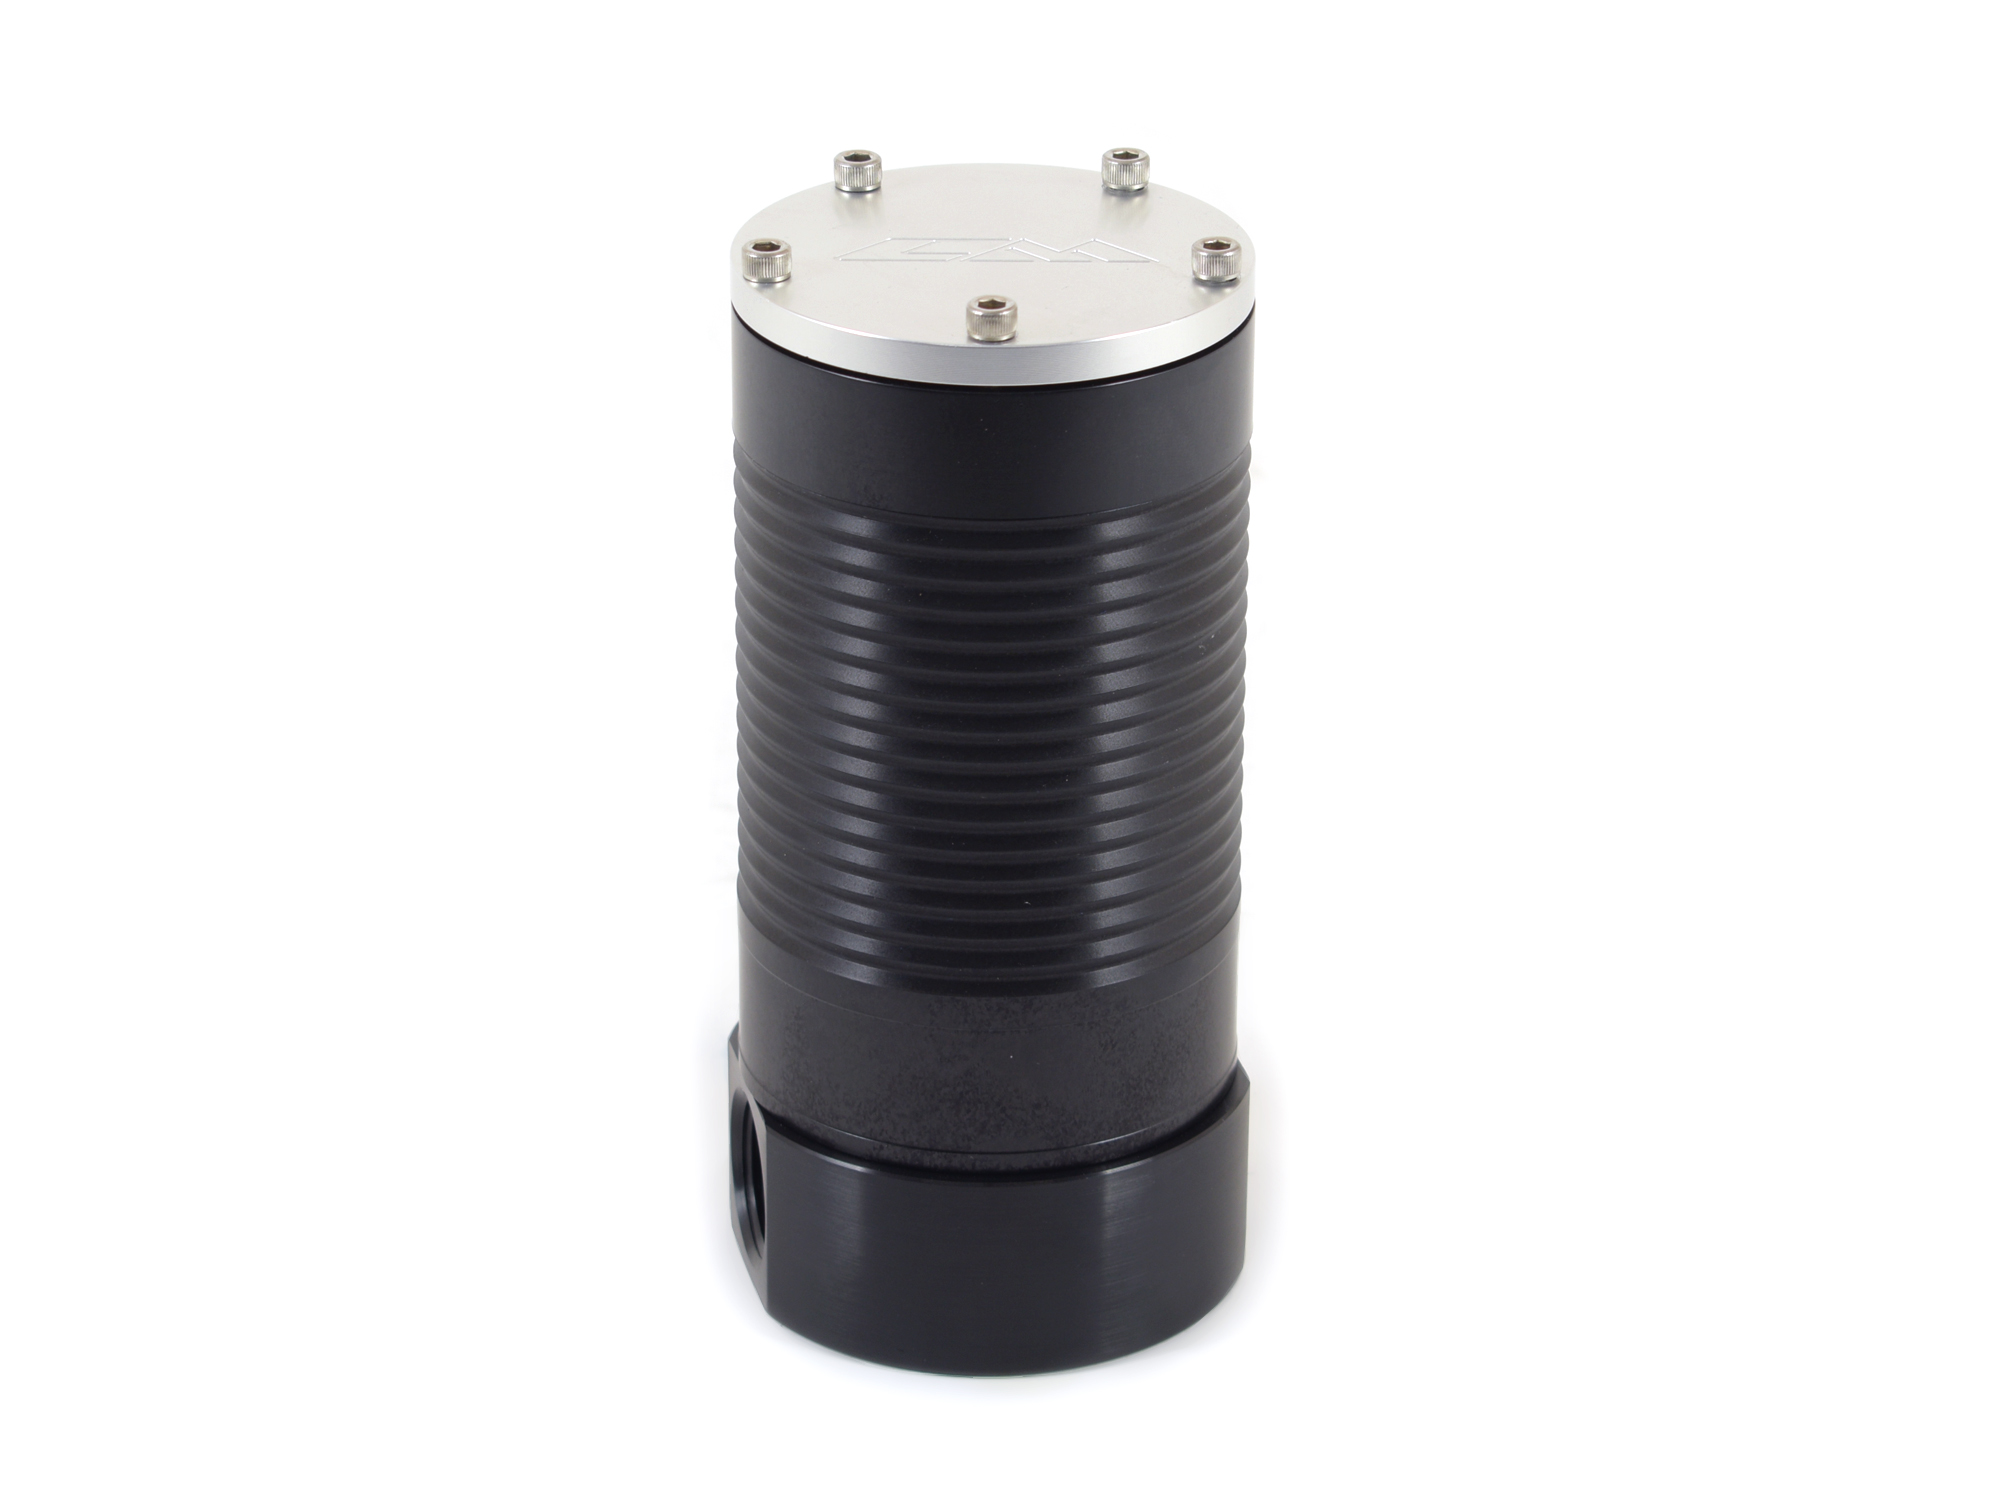 25-640 Remote Aluminum Oil Filter 6-1/4" Canister With 1-1/16"-12 O-Ring Ports - 25-640